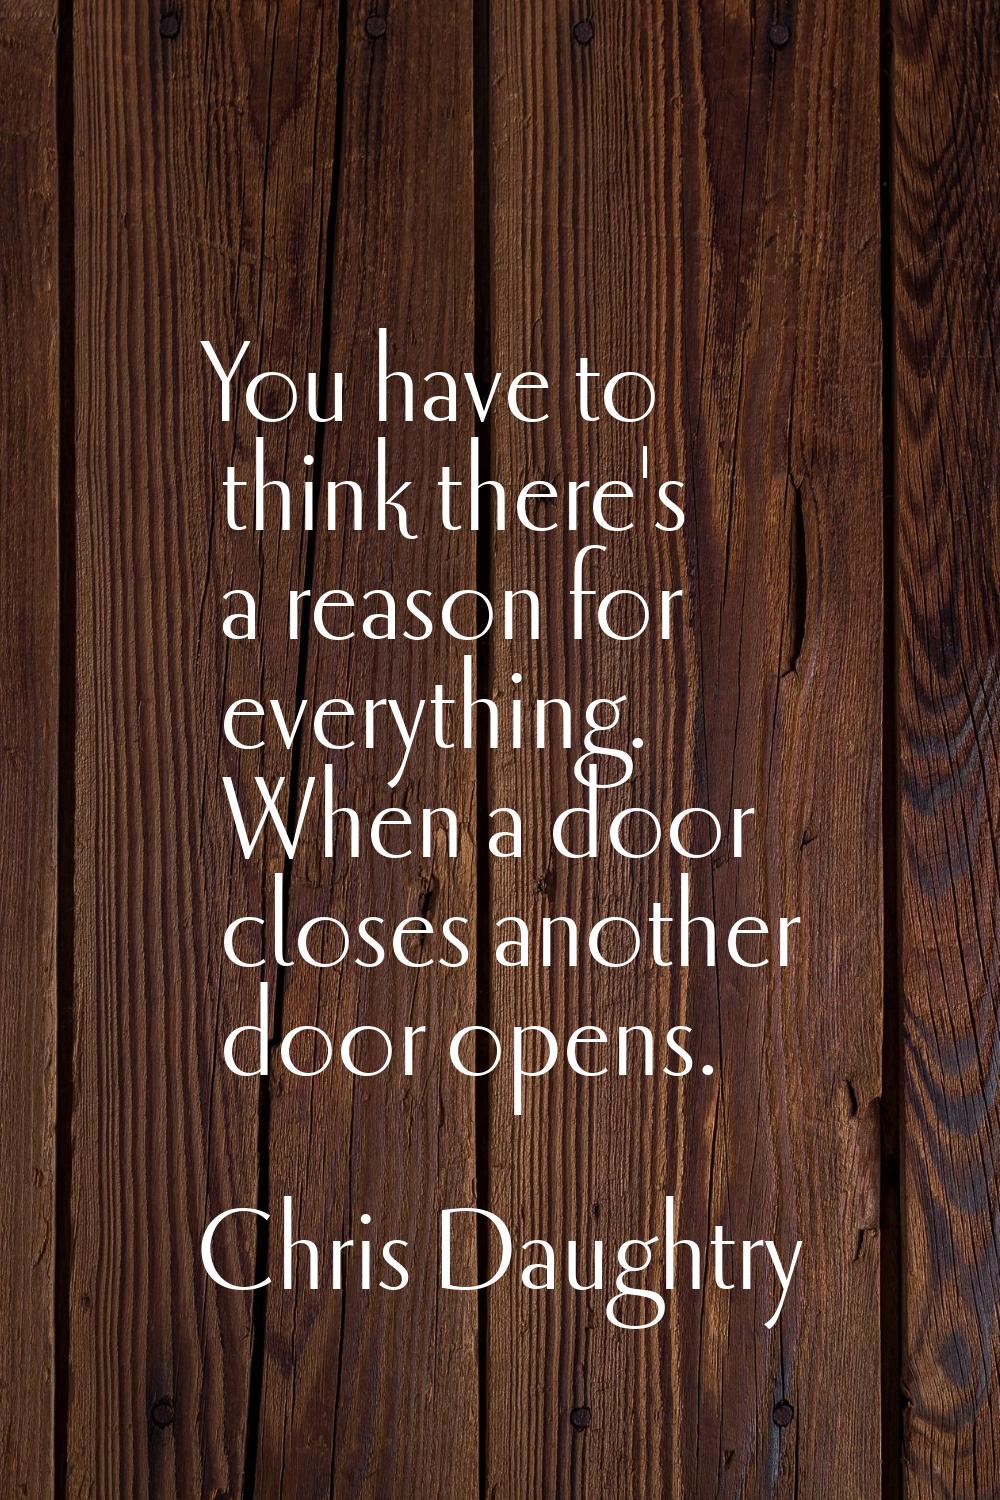 You have to think there's a reason for everything. When a door closes another door opens.